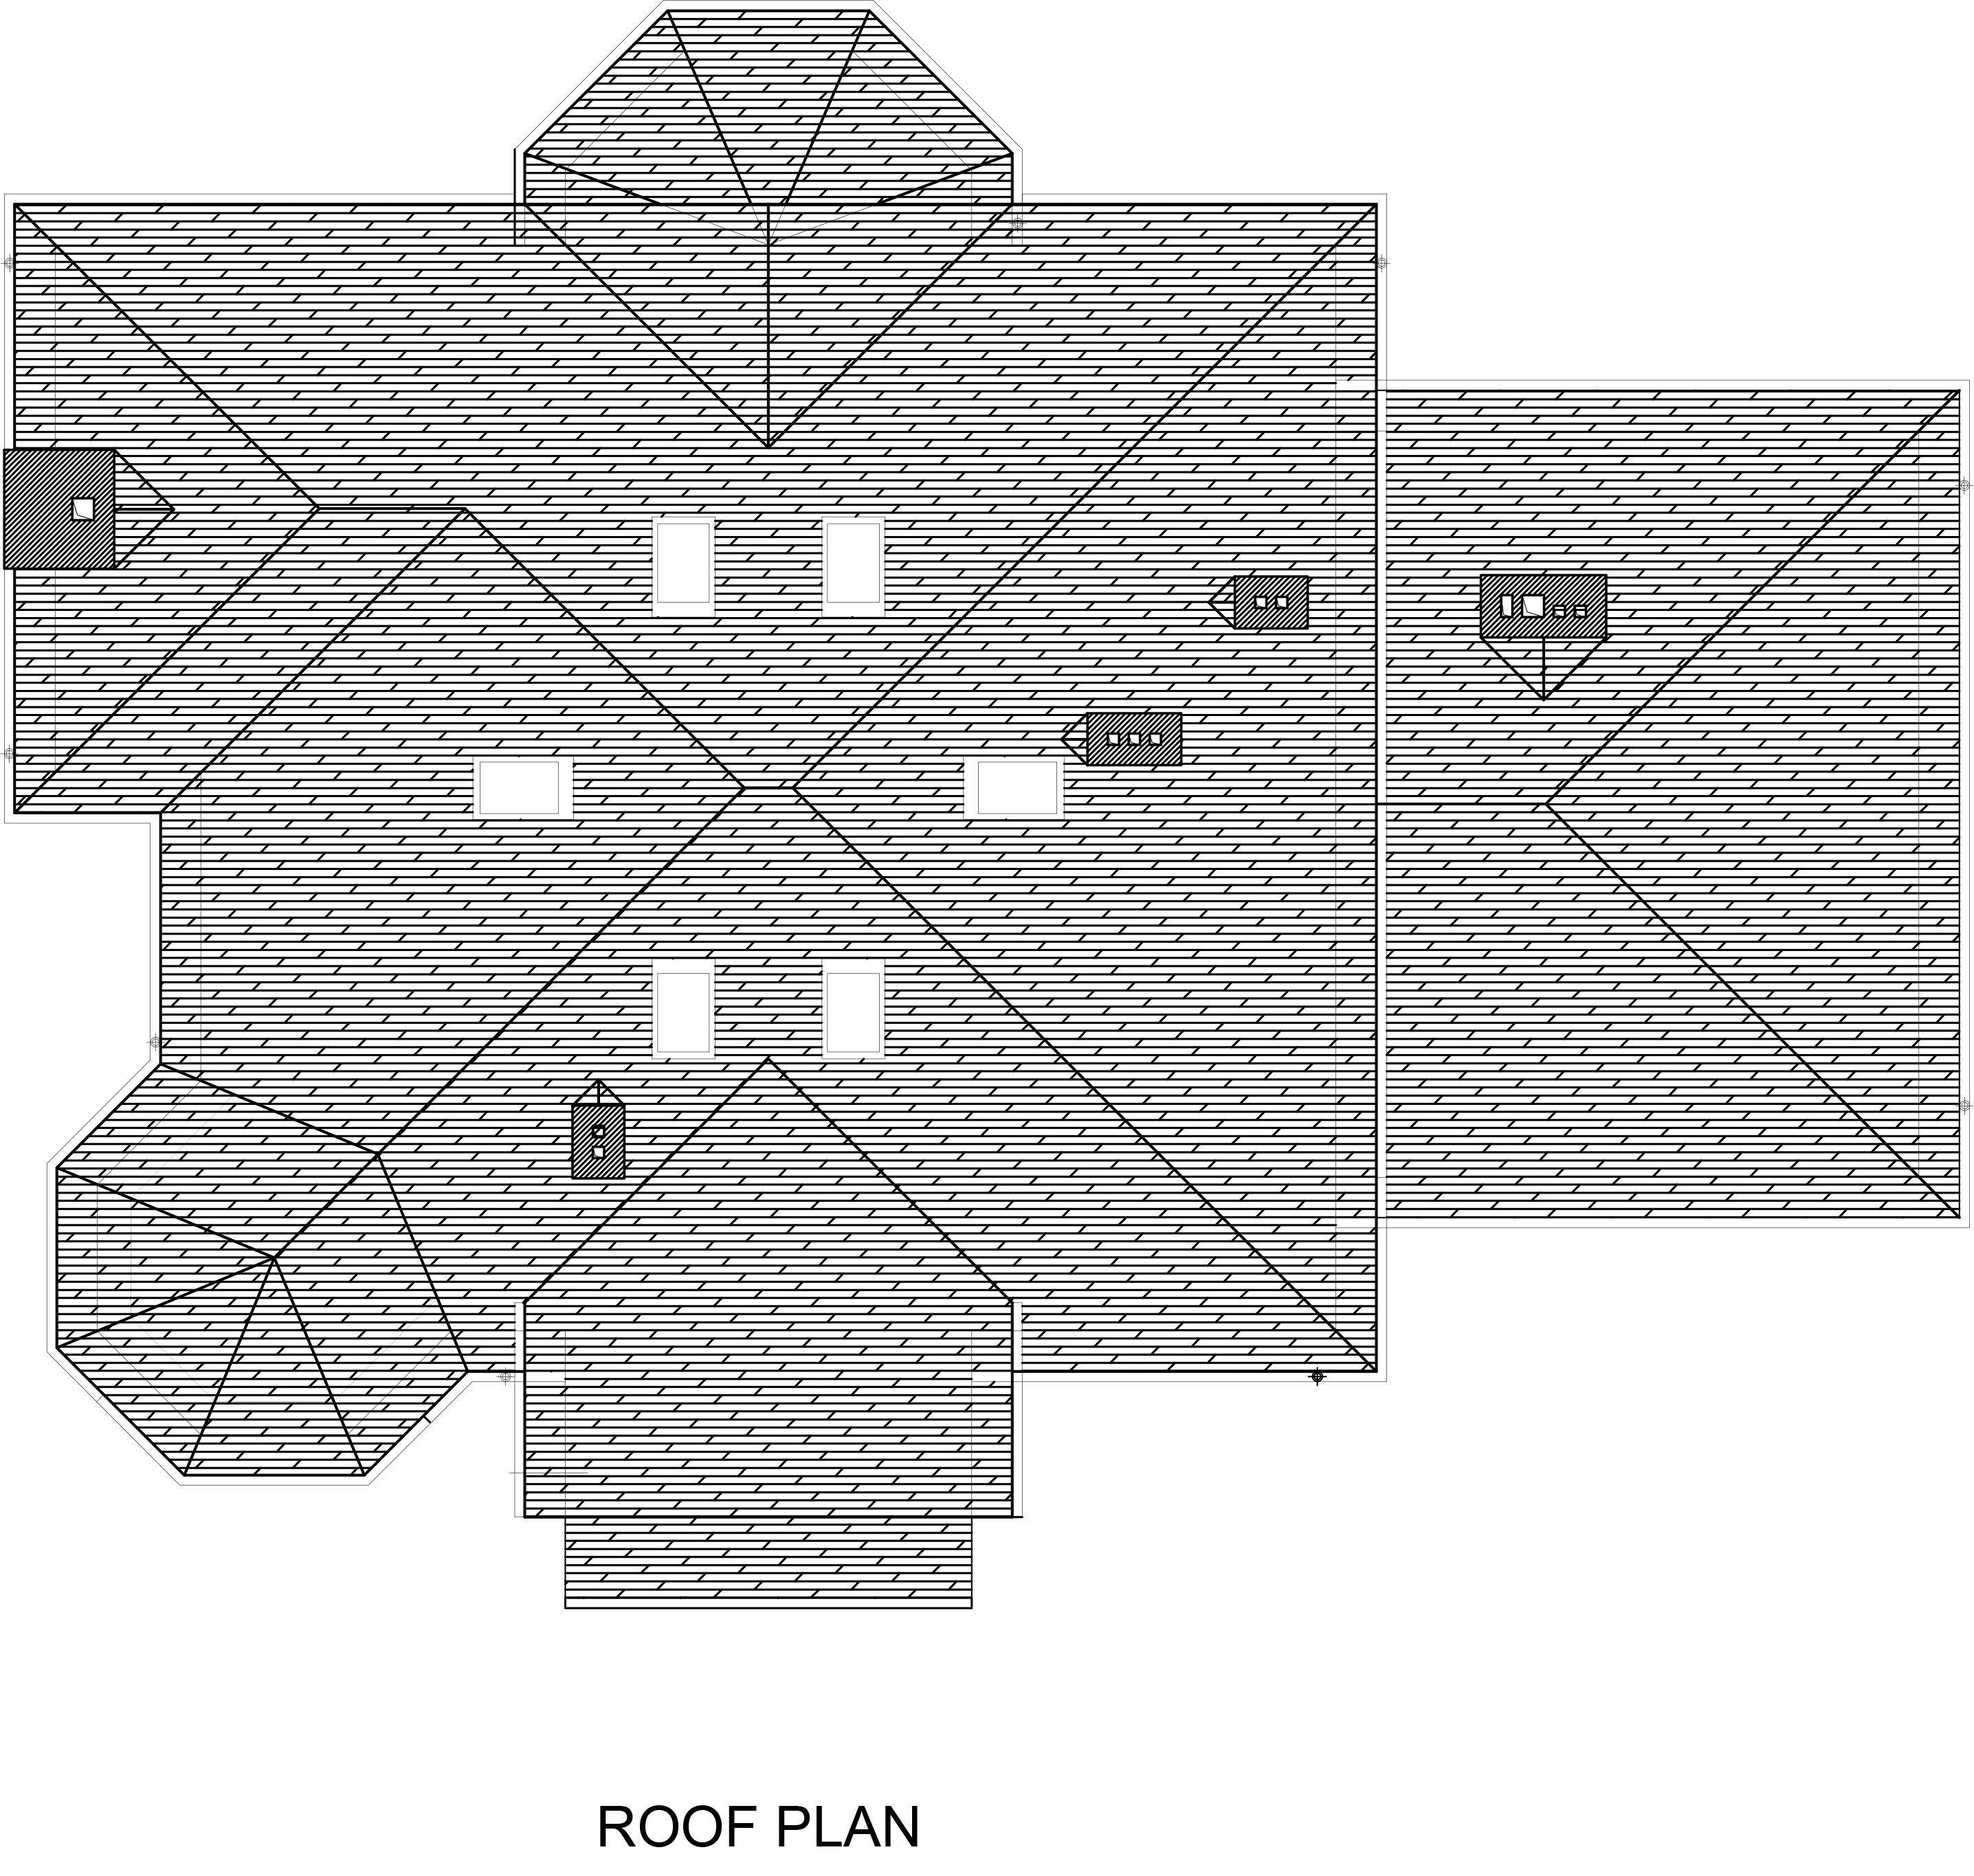 ROOF PLAN DWG NET Cad Blocks and House Plans